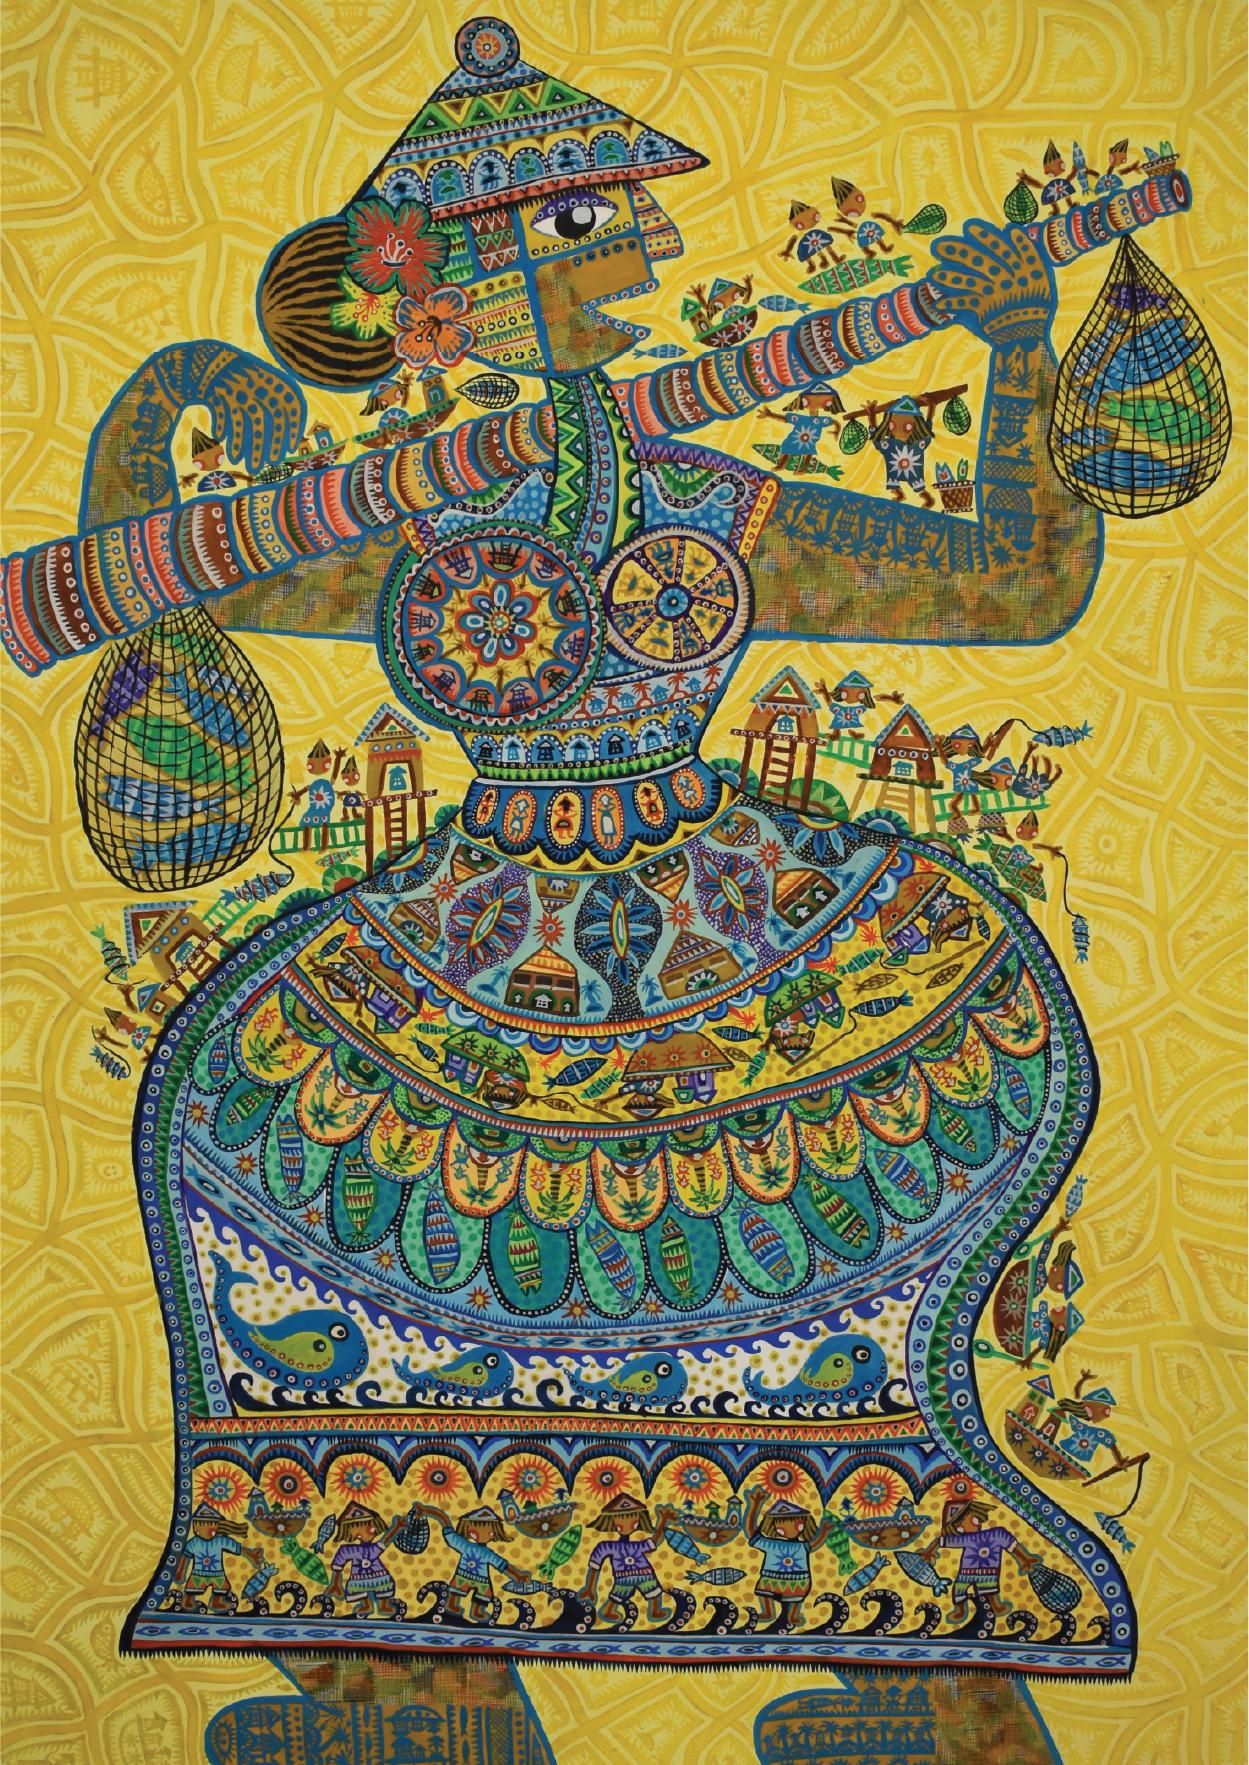 Beauty of Southeast Asian Ethnical Cultures, Dubuffet-liked art brut style